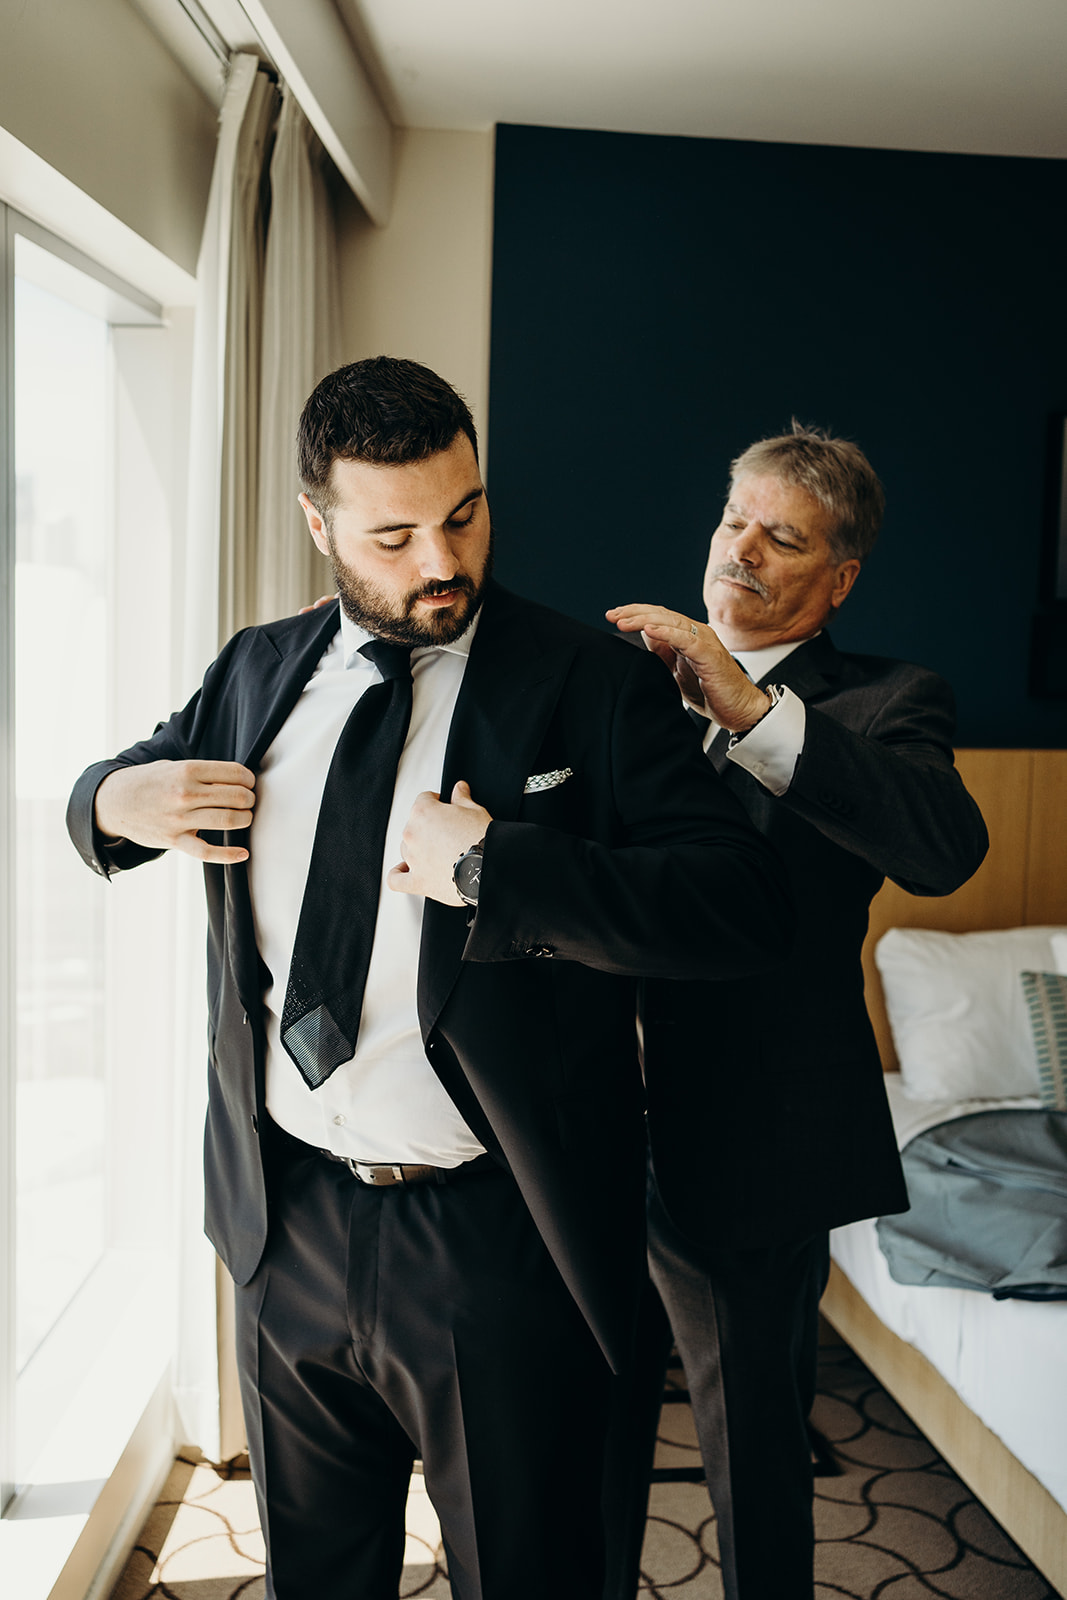 A man helping another put on his tux for the wedding.